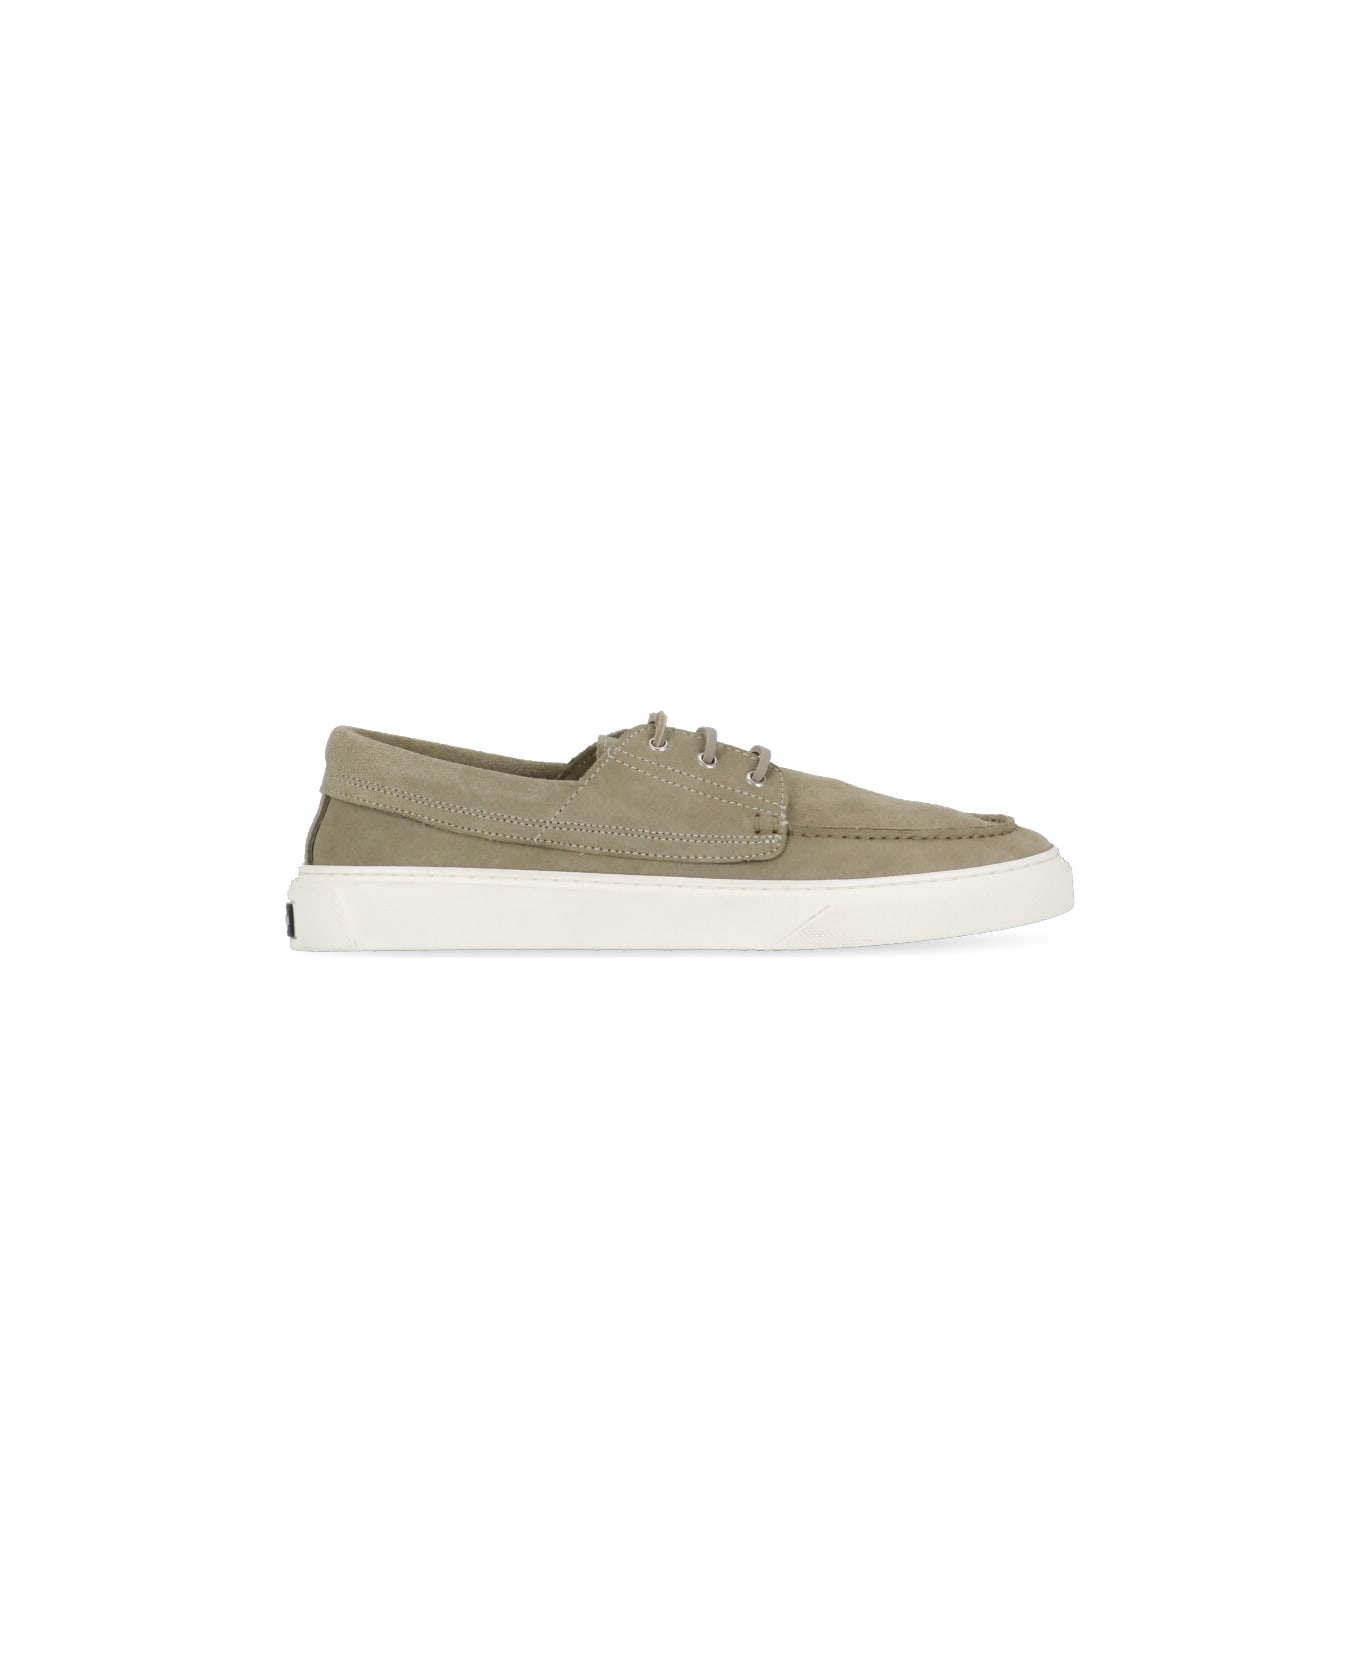 Woolrich Suede Leather Lace-up Shoes - Green